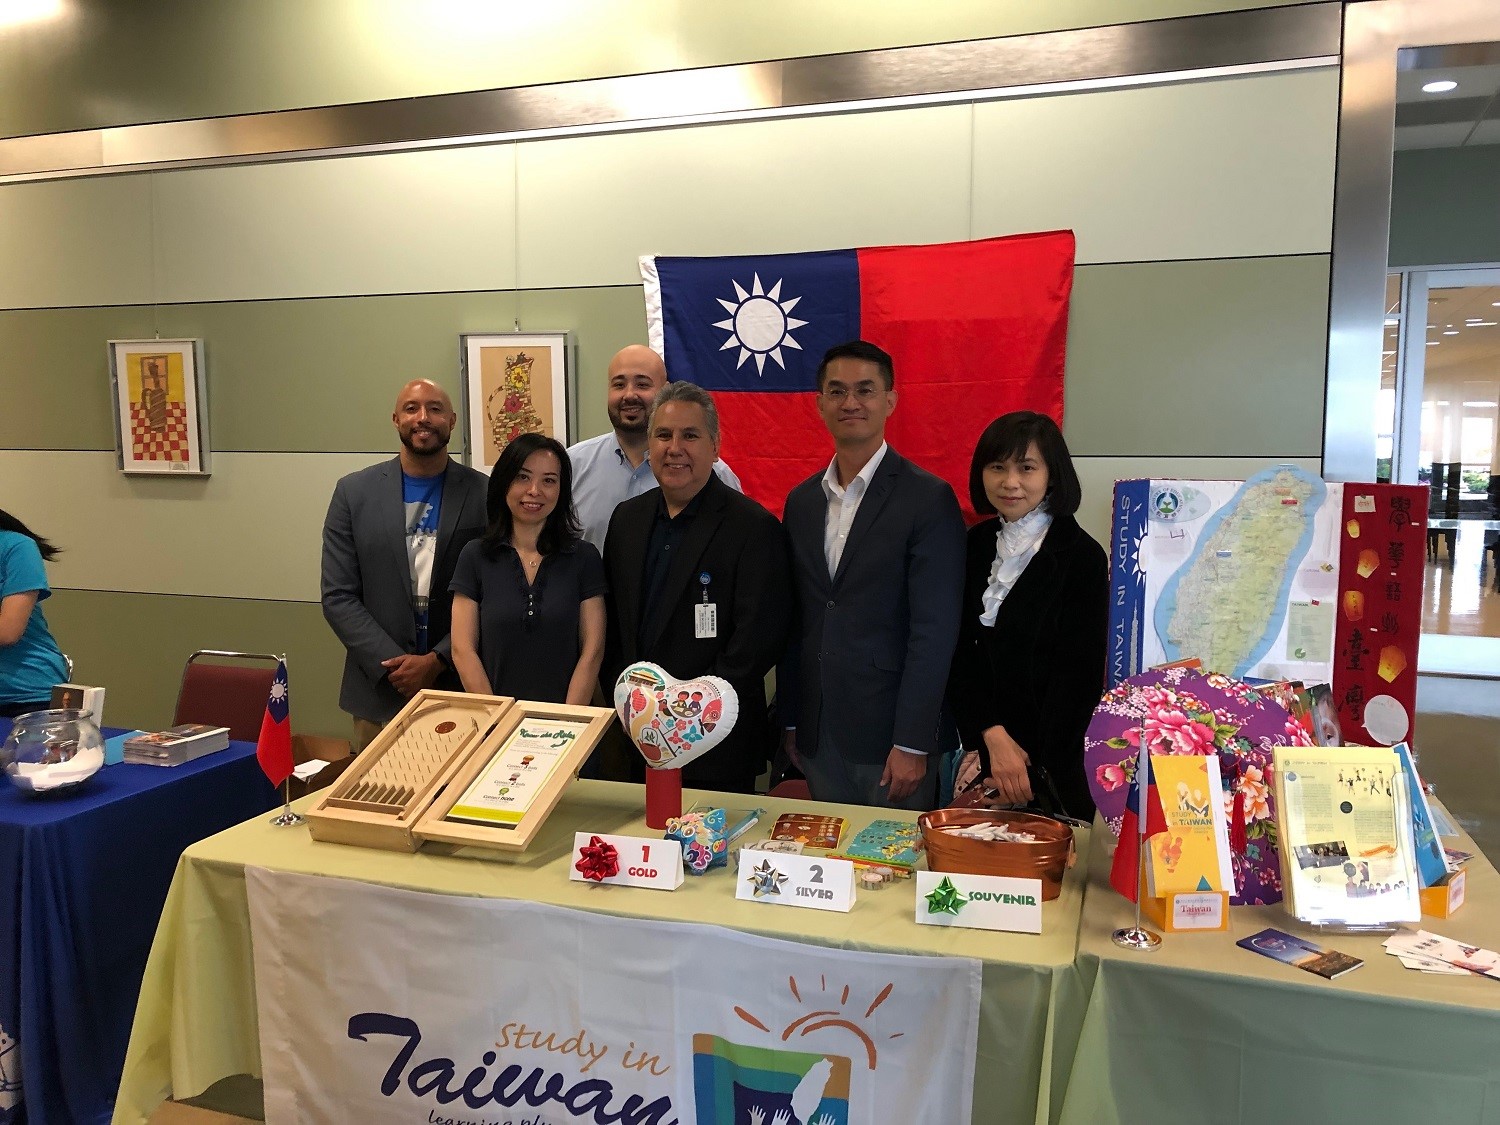 “Study in Taiwan and Have Fun” Drew Crowds at HISD’s Career Expo